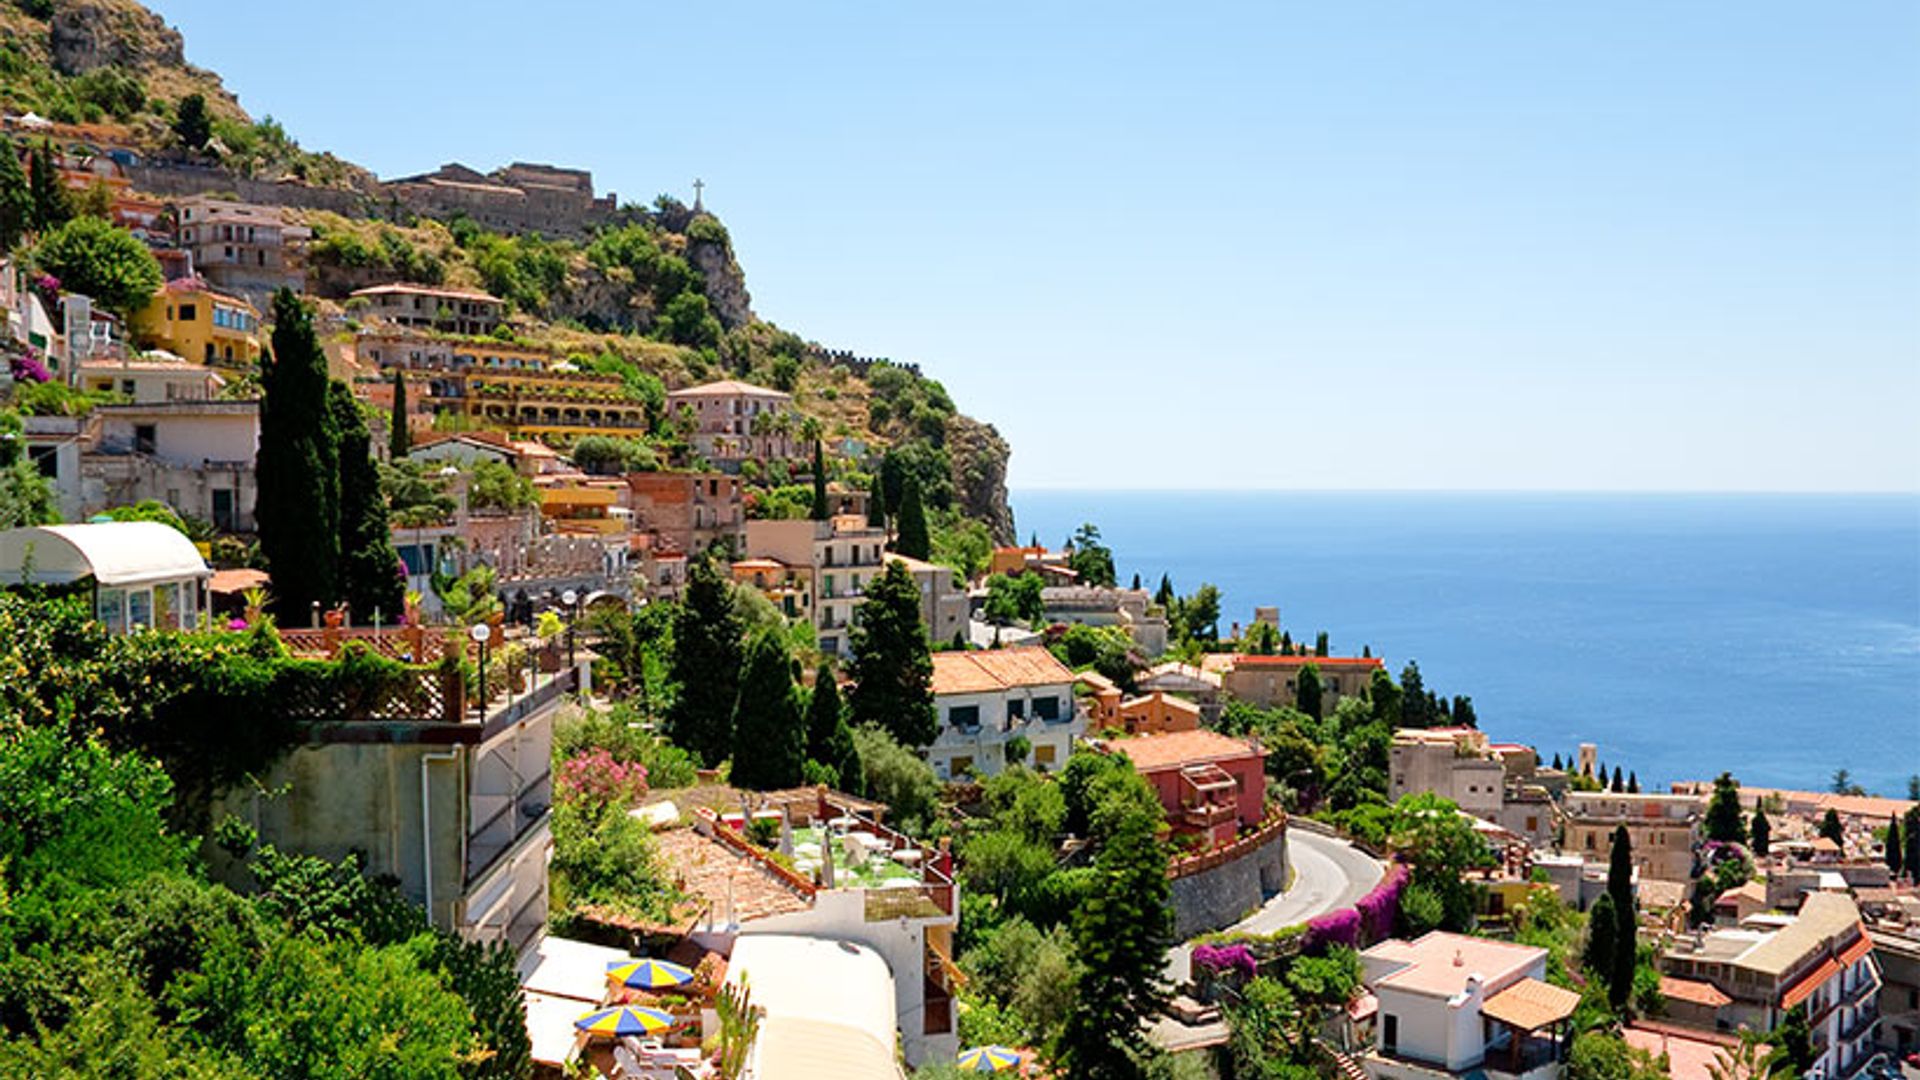 What to do in Taormina: the best places to see, eat and stay in the scenic Sicilian town